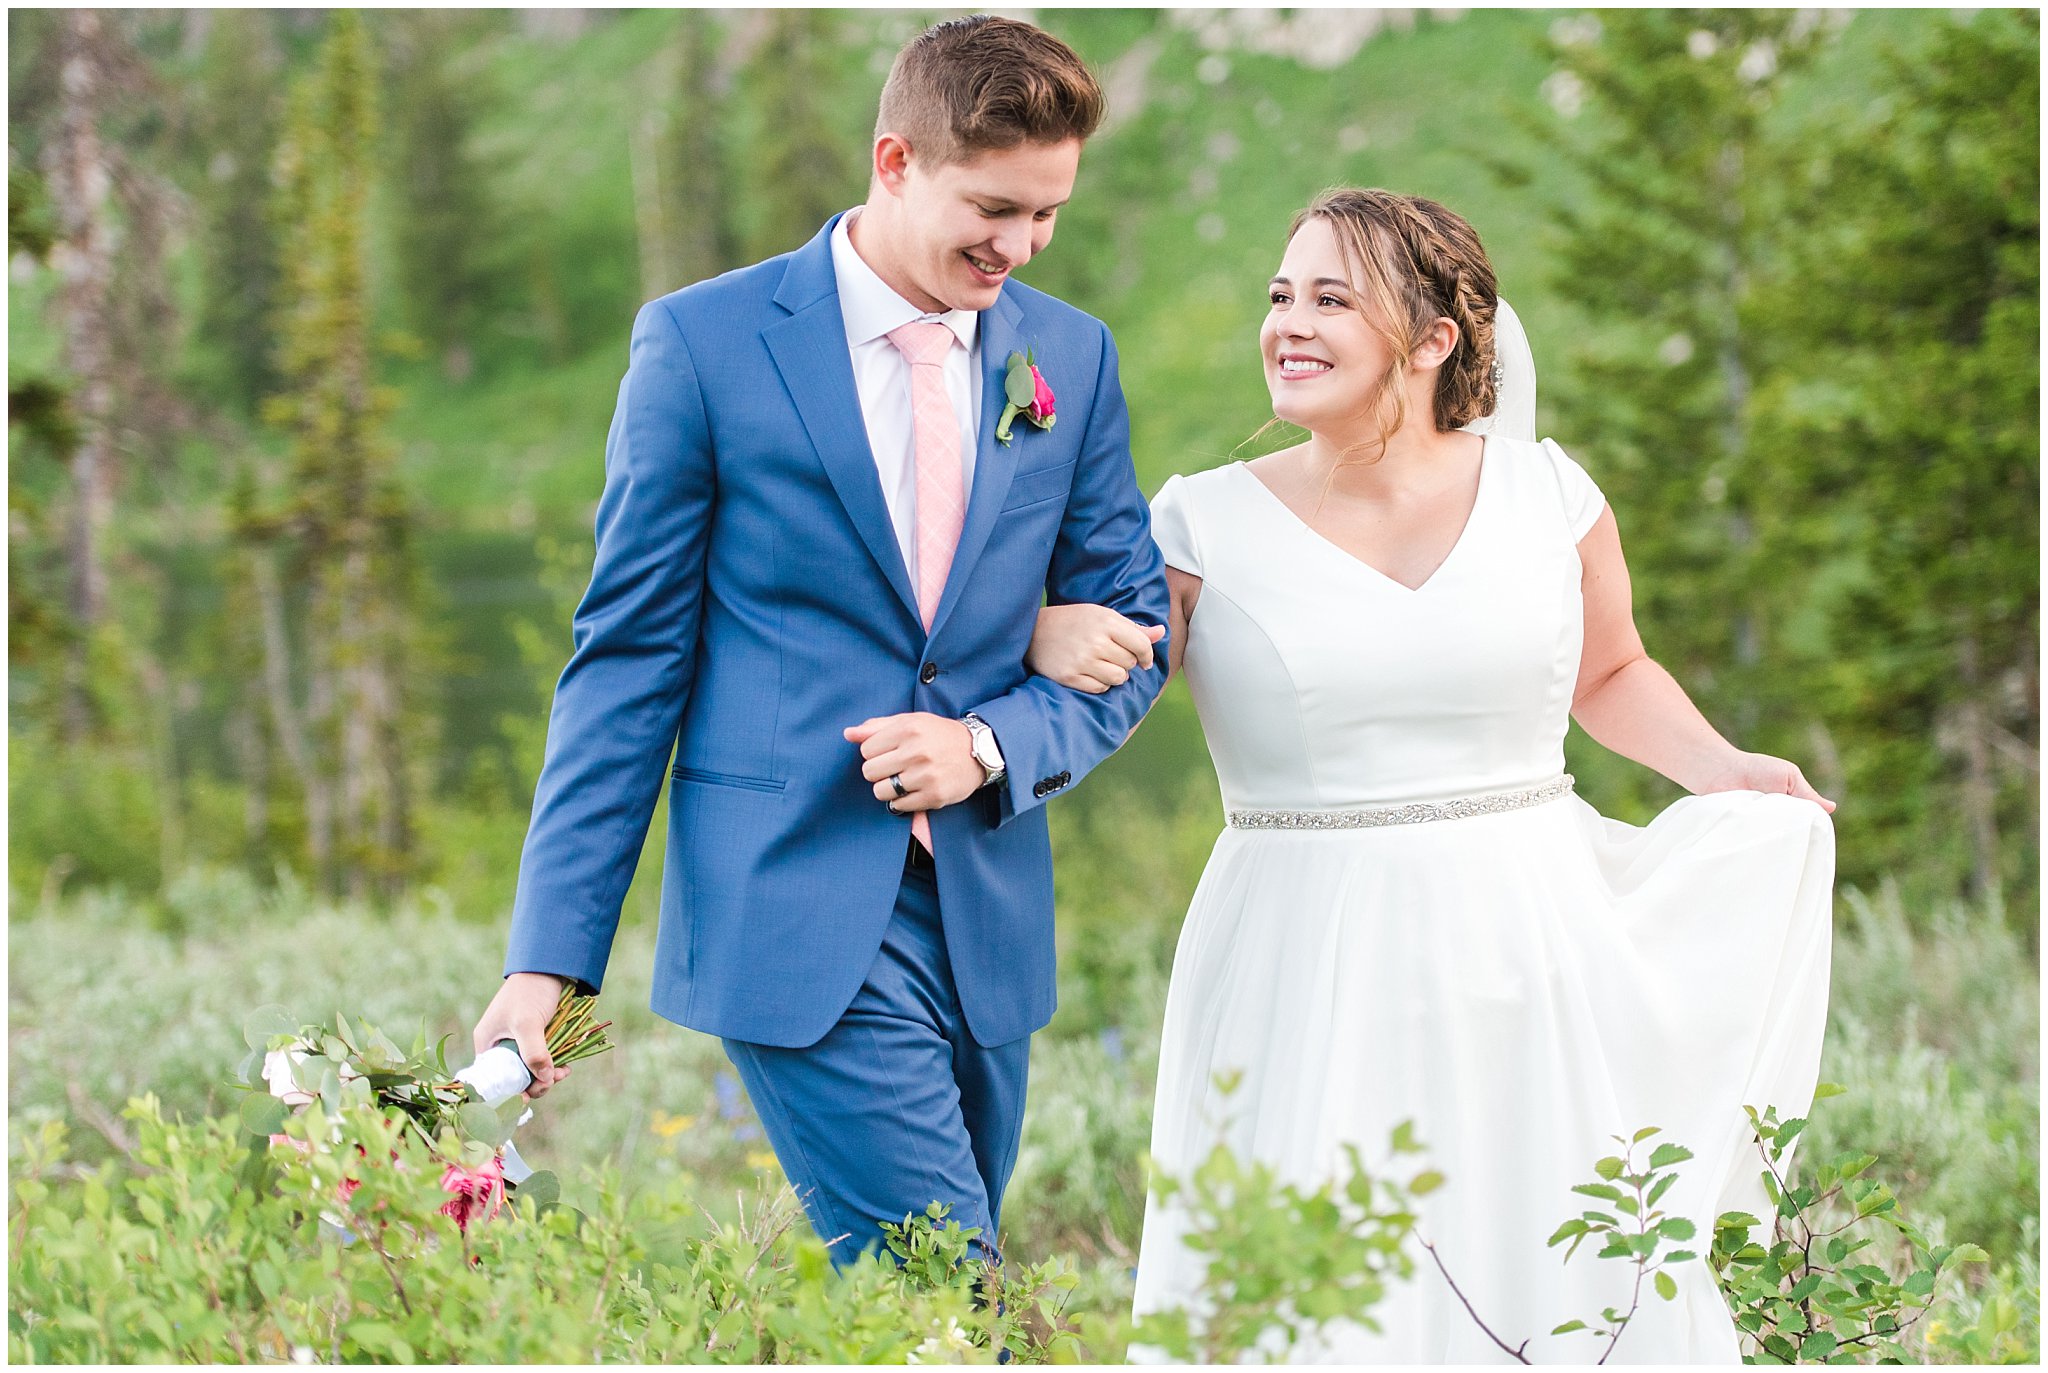 Bride and groom portraits in the Utah mountains wearing flowy wedding dress and cornish blue suit with pink and white florals | Summer Mountain wildflowers | Tony Grove Summer Formal Session | Jessie and Dallin Photography